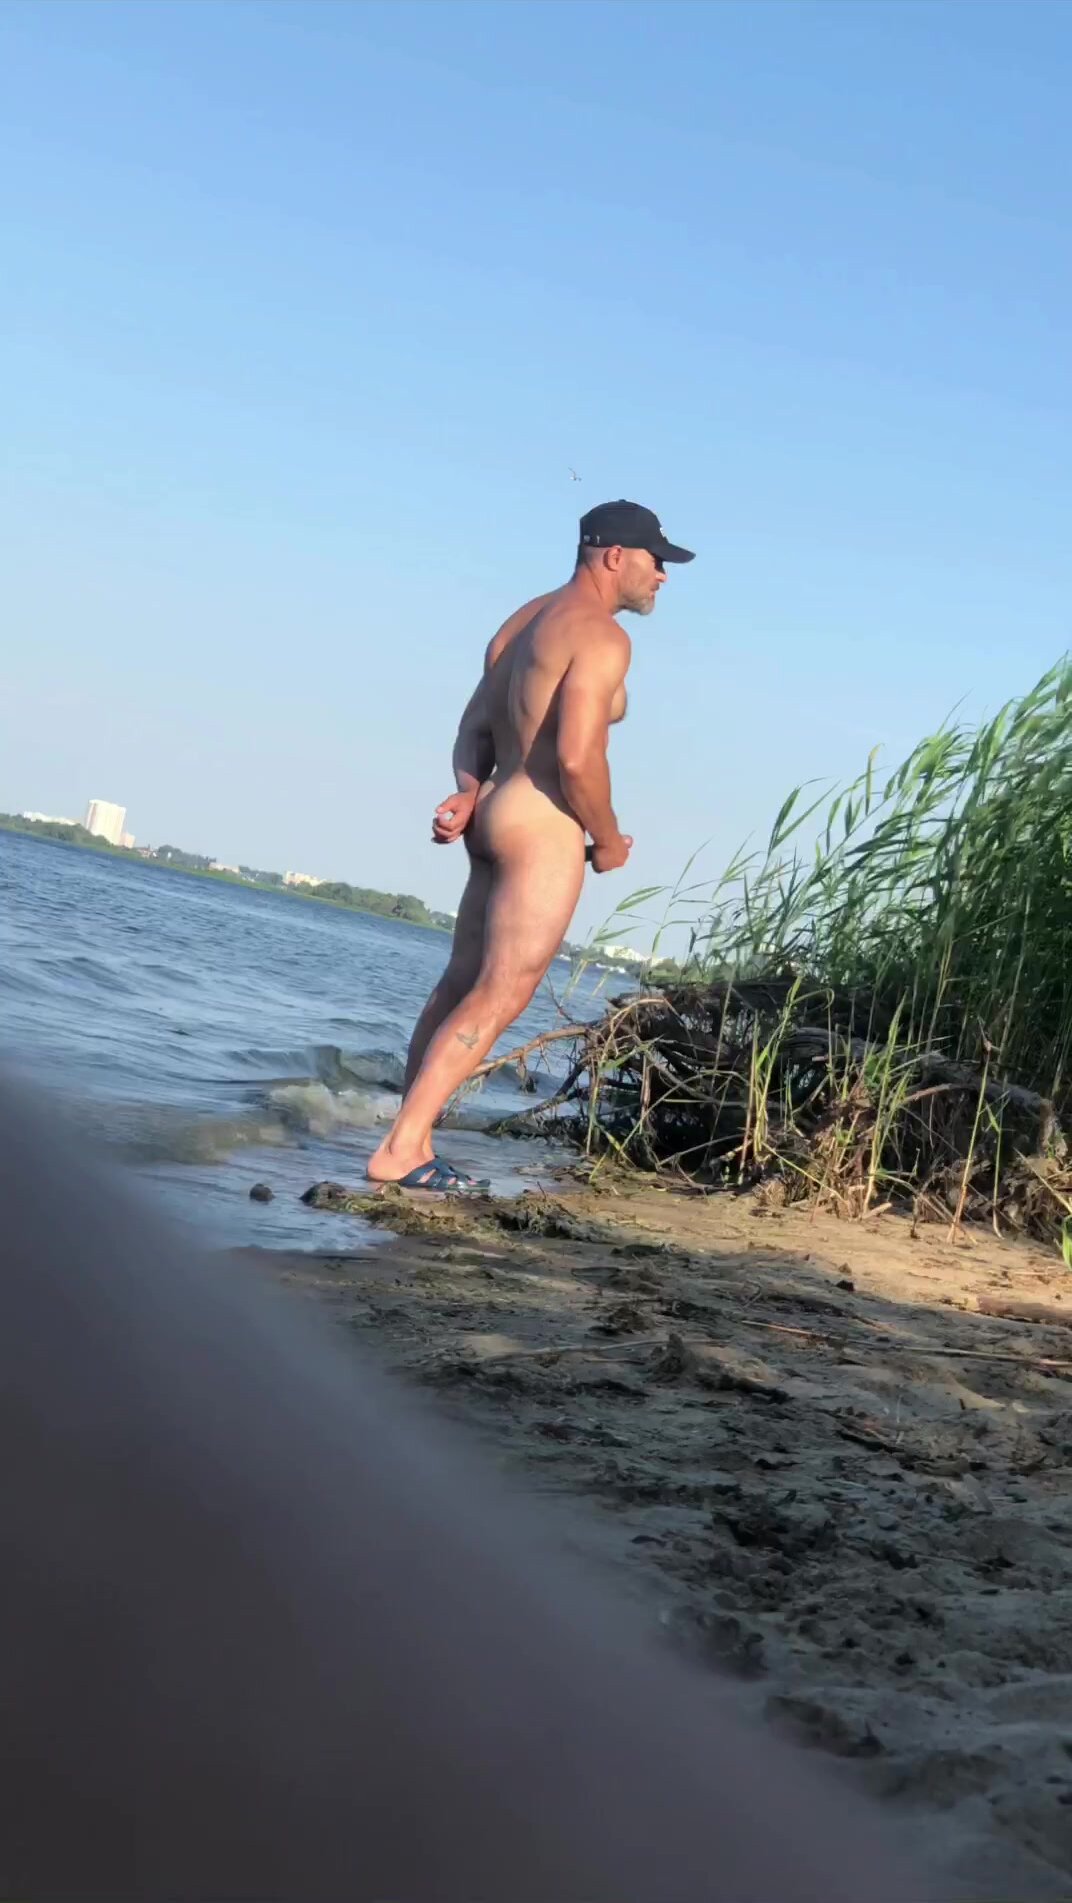 Jerking off by the lake